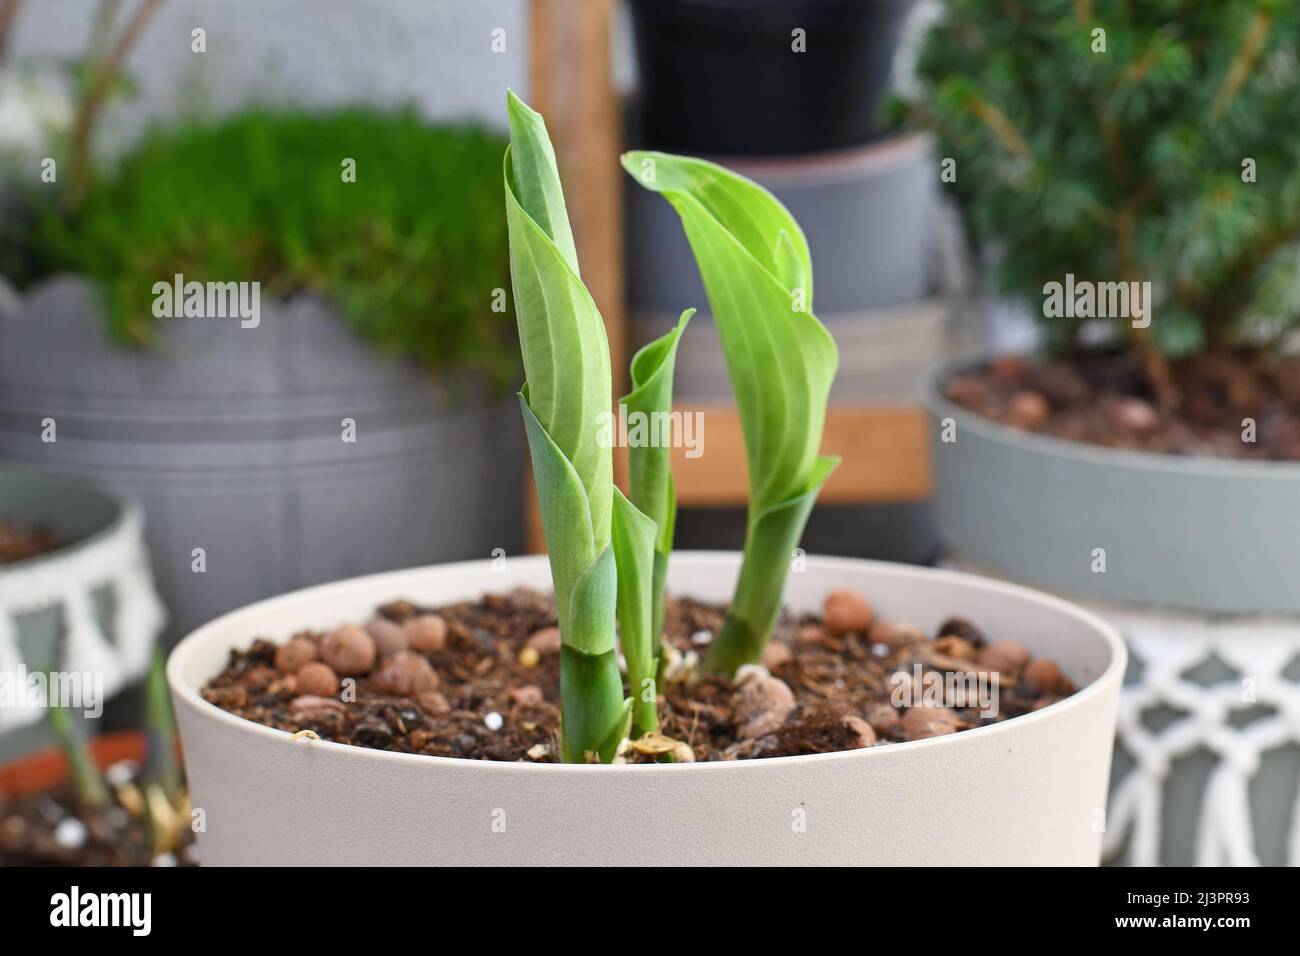 New shoots of hosta plant growing out of pot in early spring Stock Photo